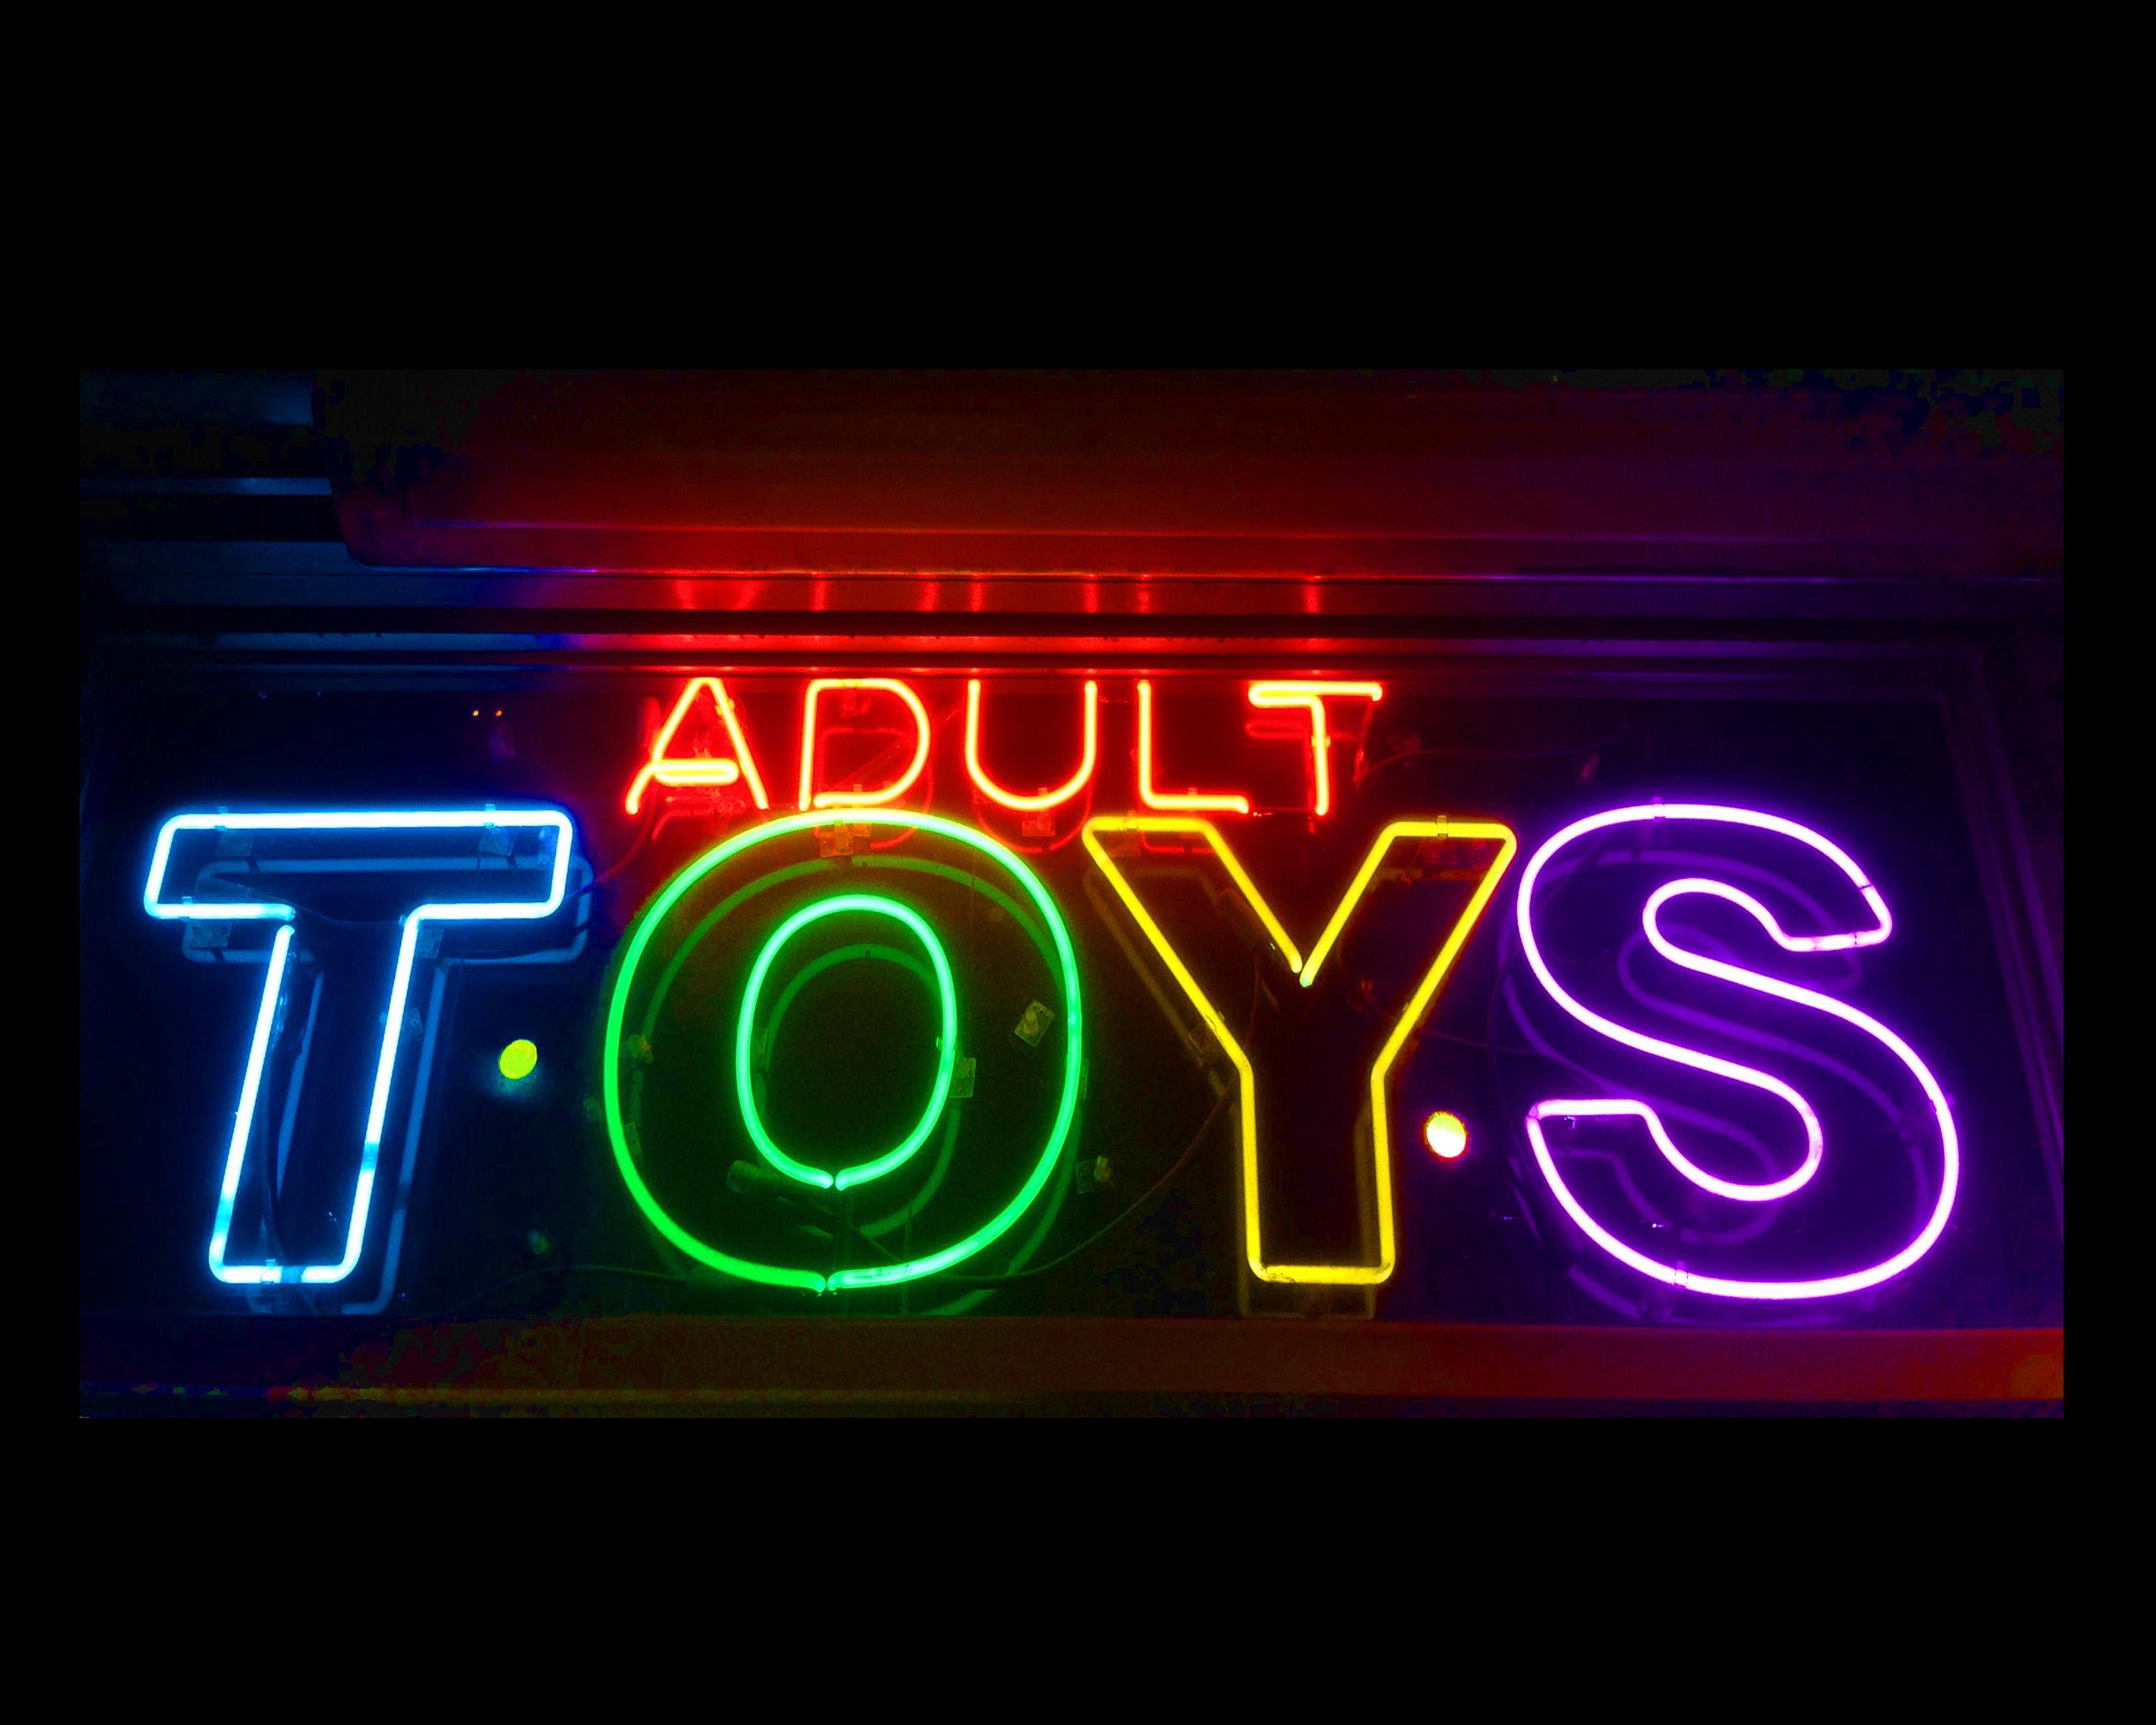 Richard Heeps Color Photograph - Adult Toys, New York - Neon Color Street Photography